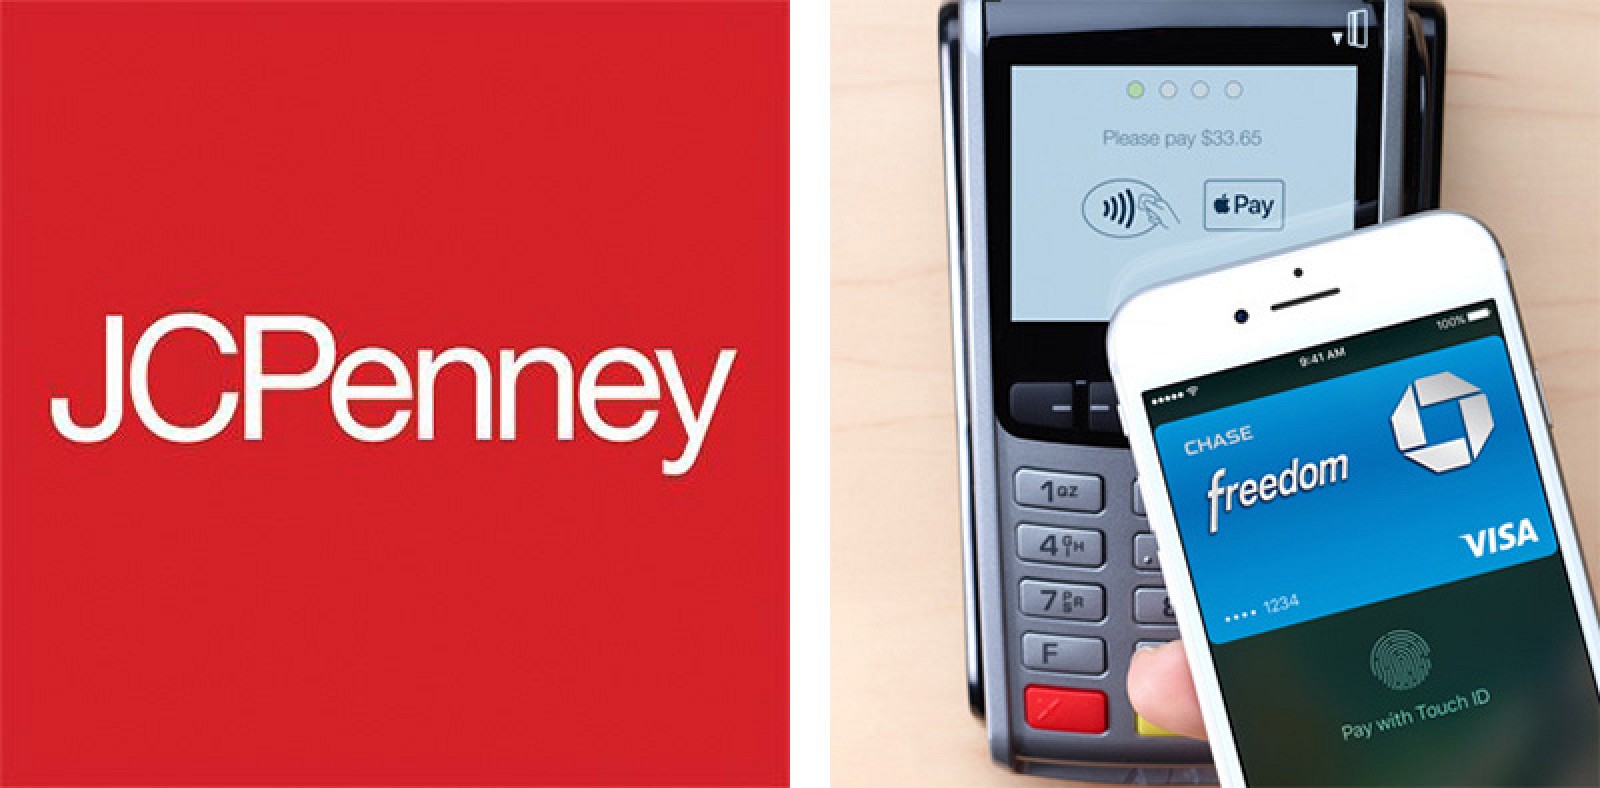 JCPenney Has Reinstated Apple Pay in All Retail Locations